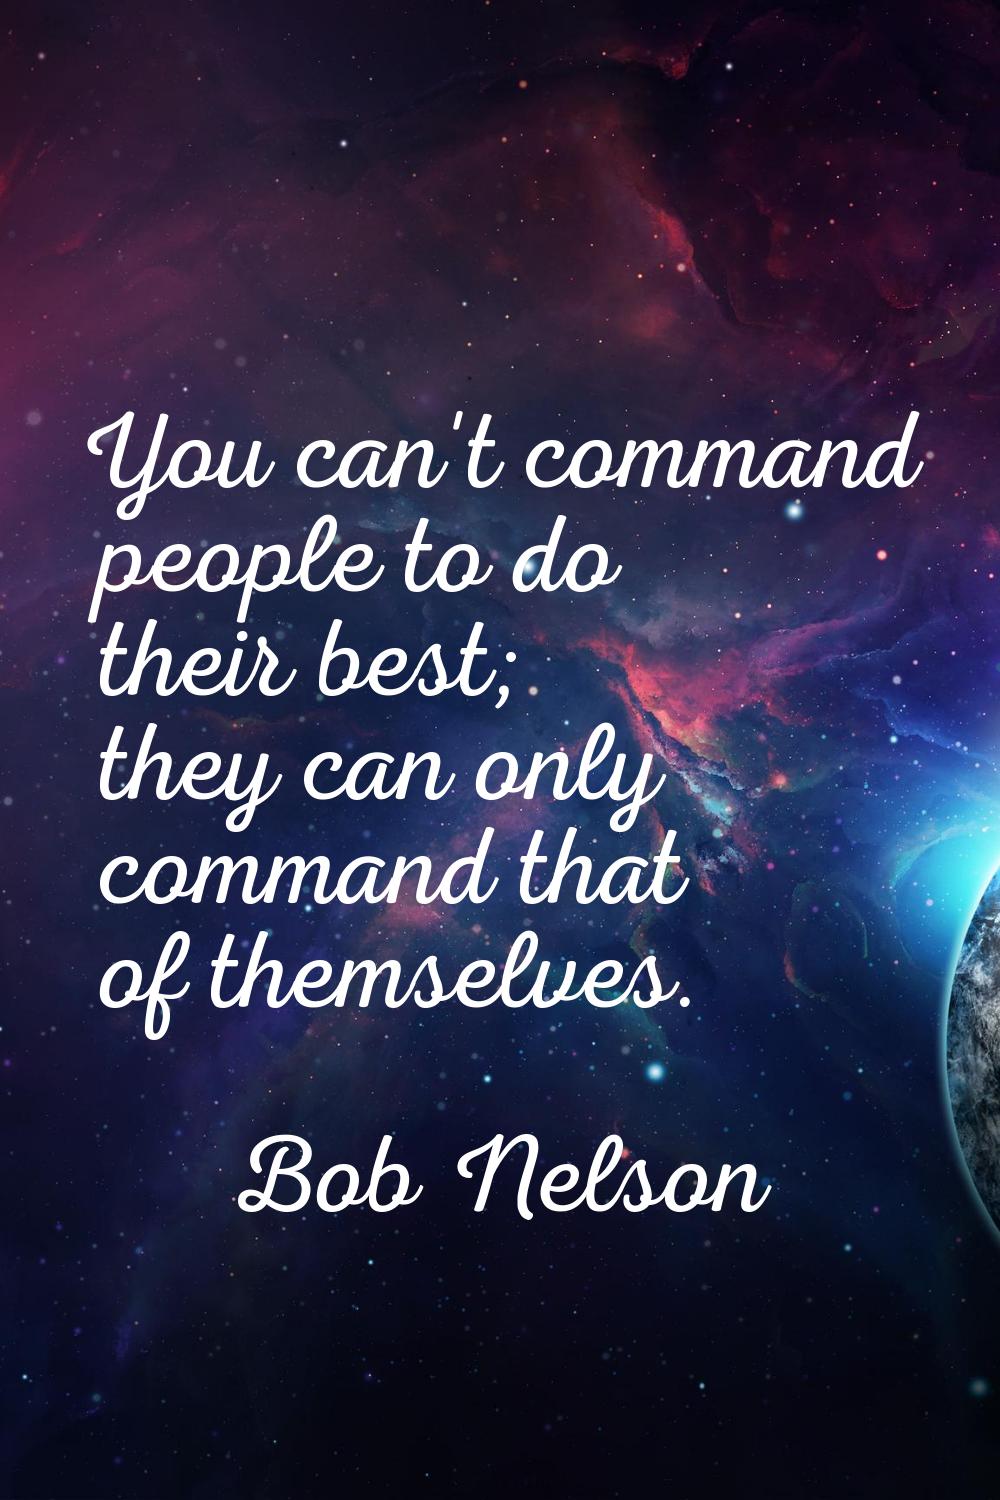 You can't command people to do their best; they can only command that of themselves.